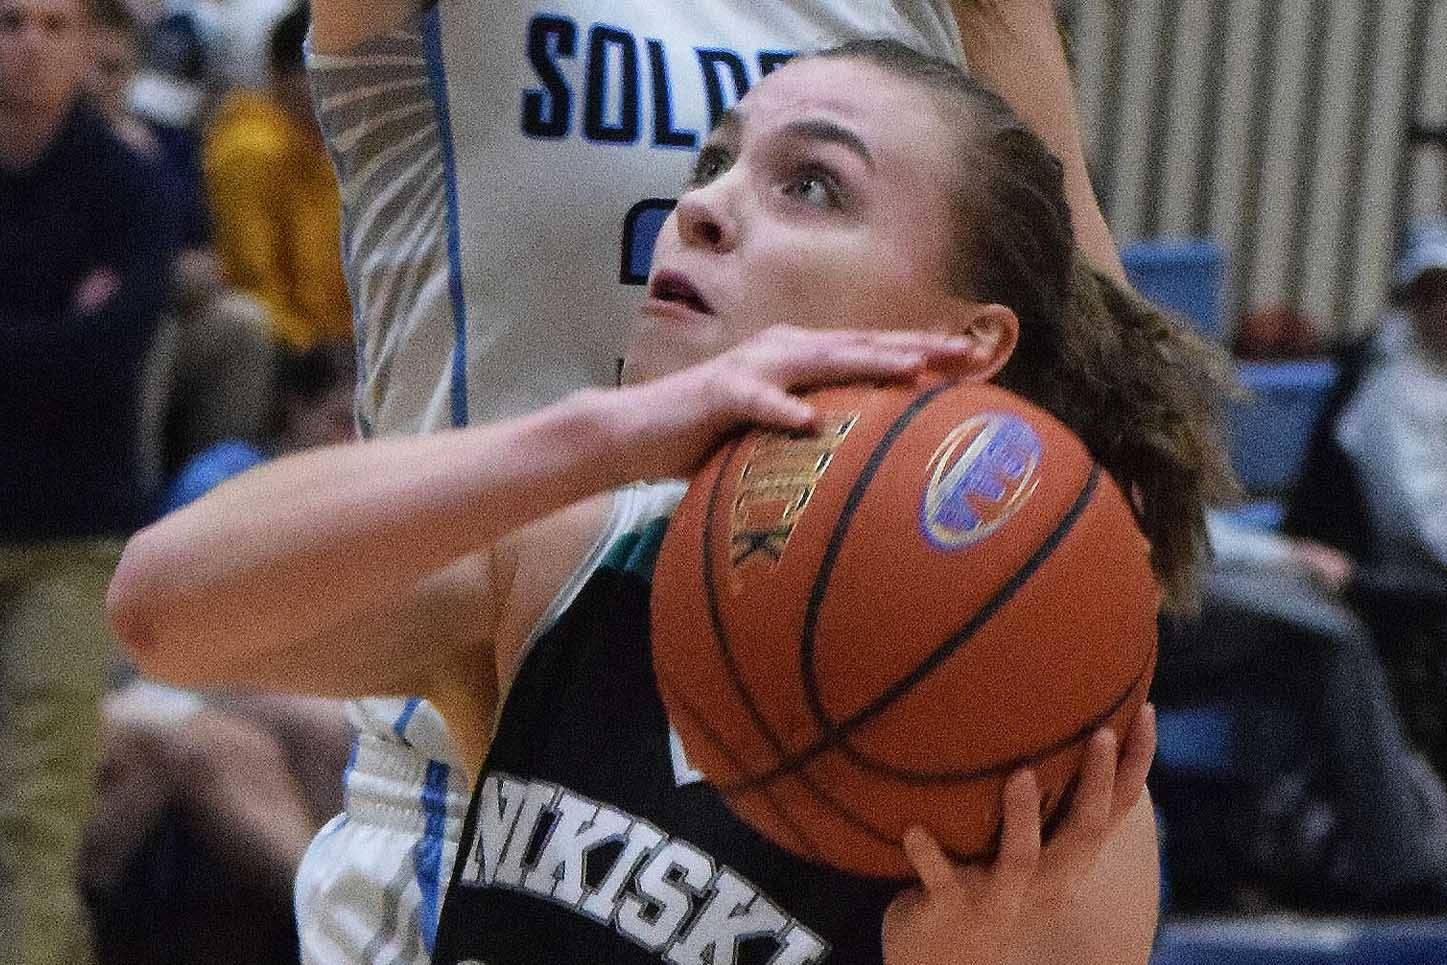 Nikiski’s Bethany Carstens drives in a nonconference game at Soldotna High School this season. (Photo by Joey Klecka/Peninsula Carion)